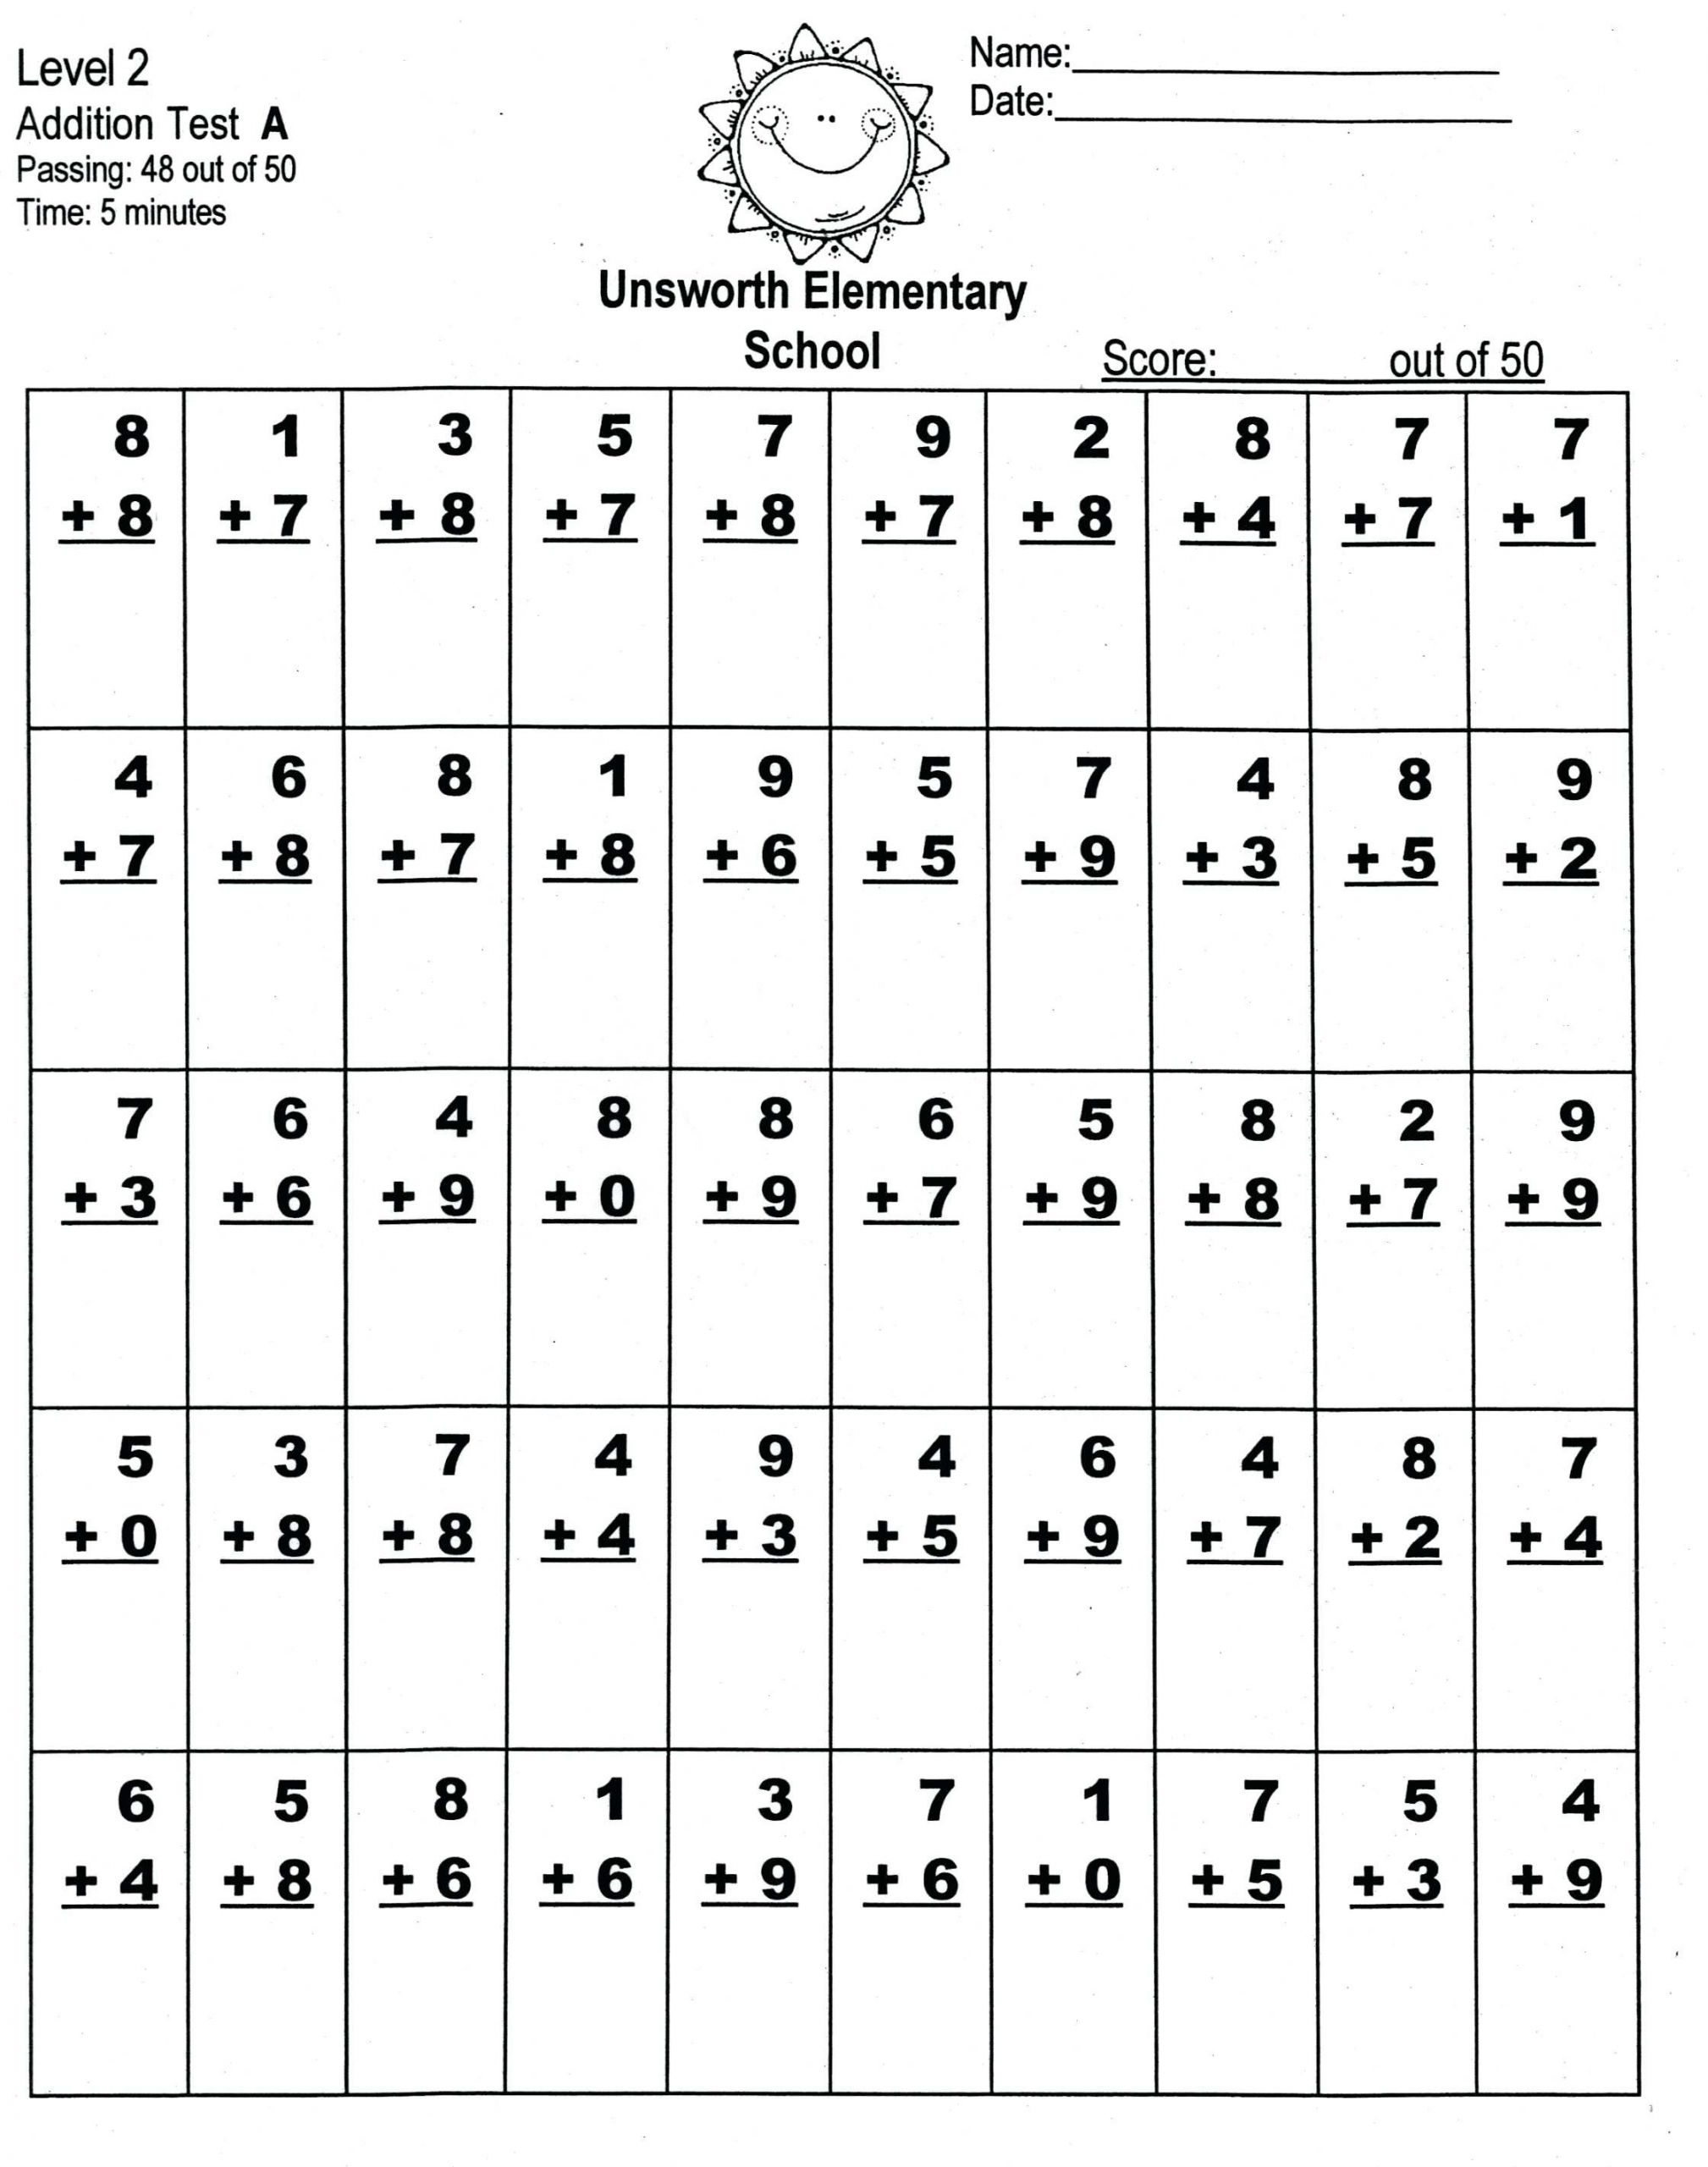 printable-math-worksheets-2nd-grade-customize-and-print